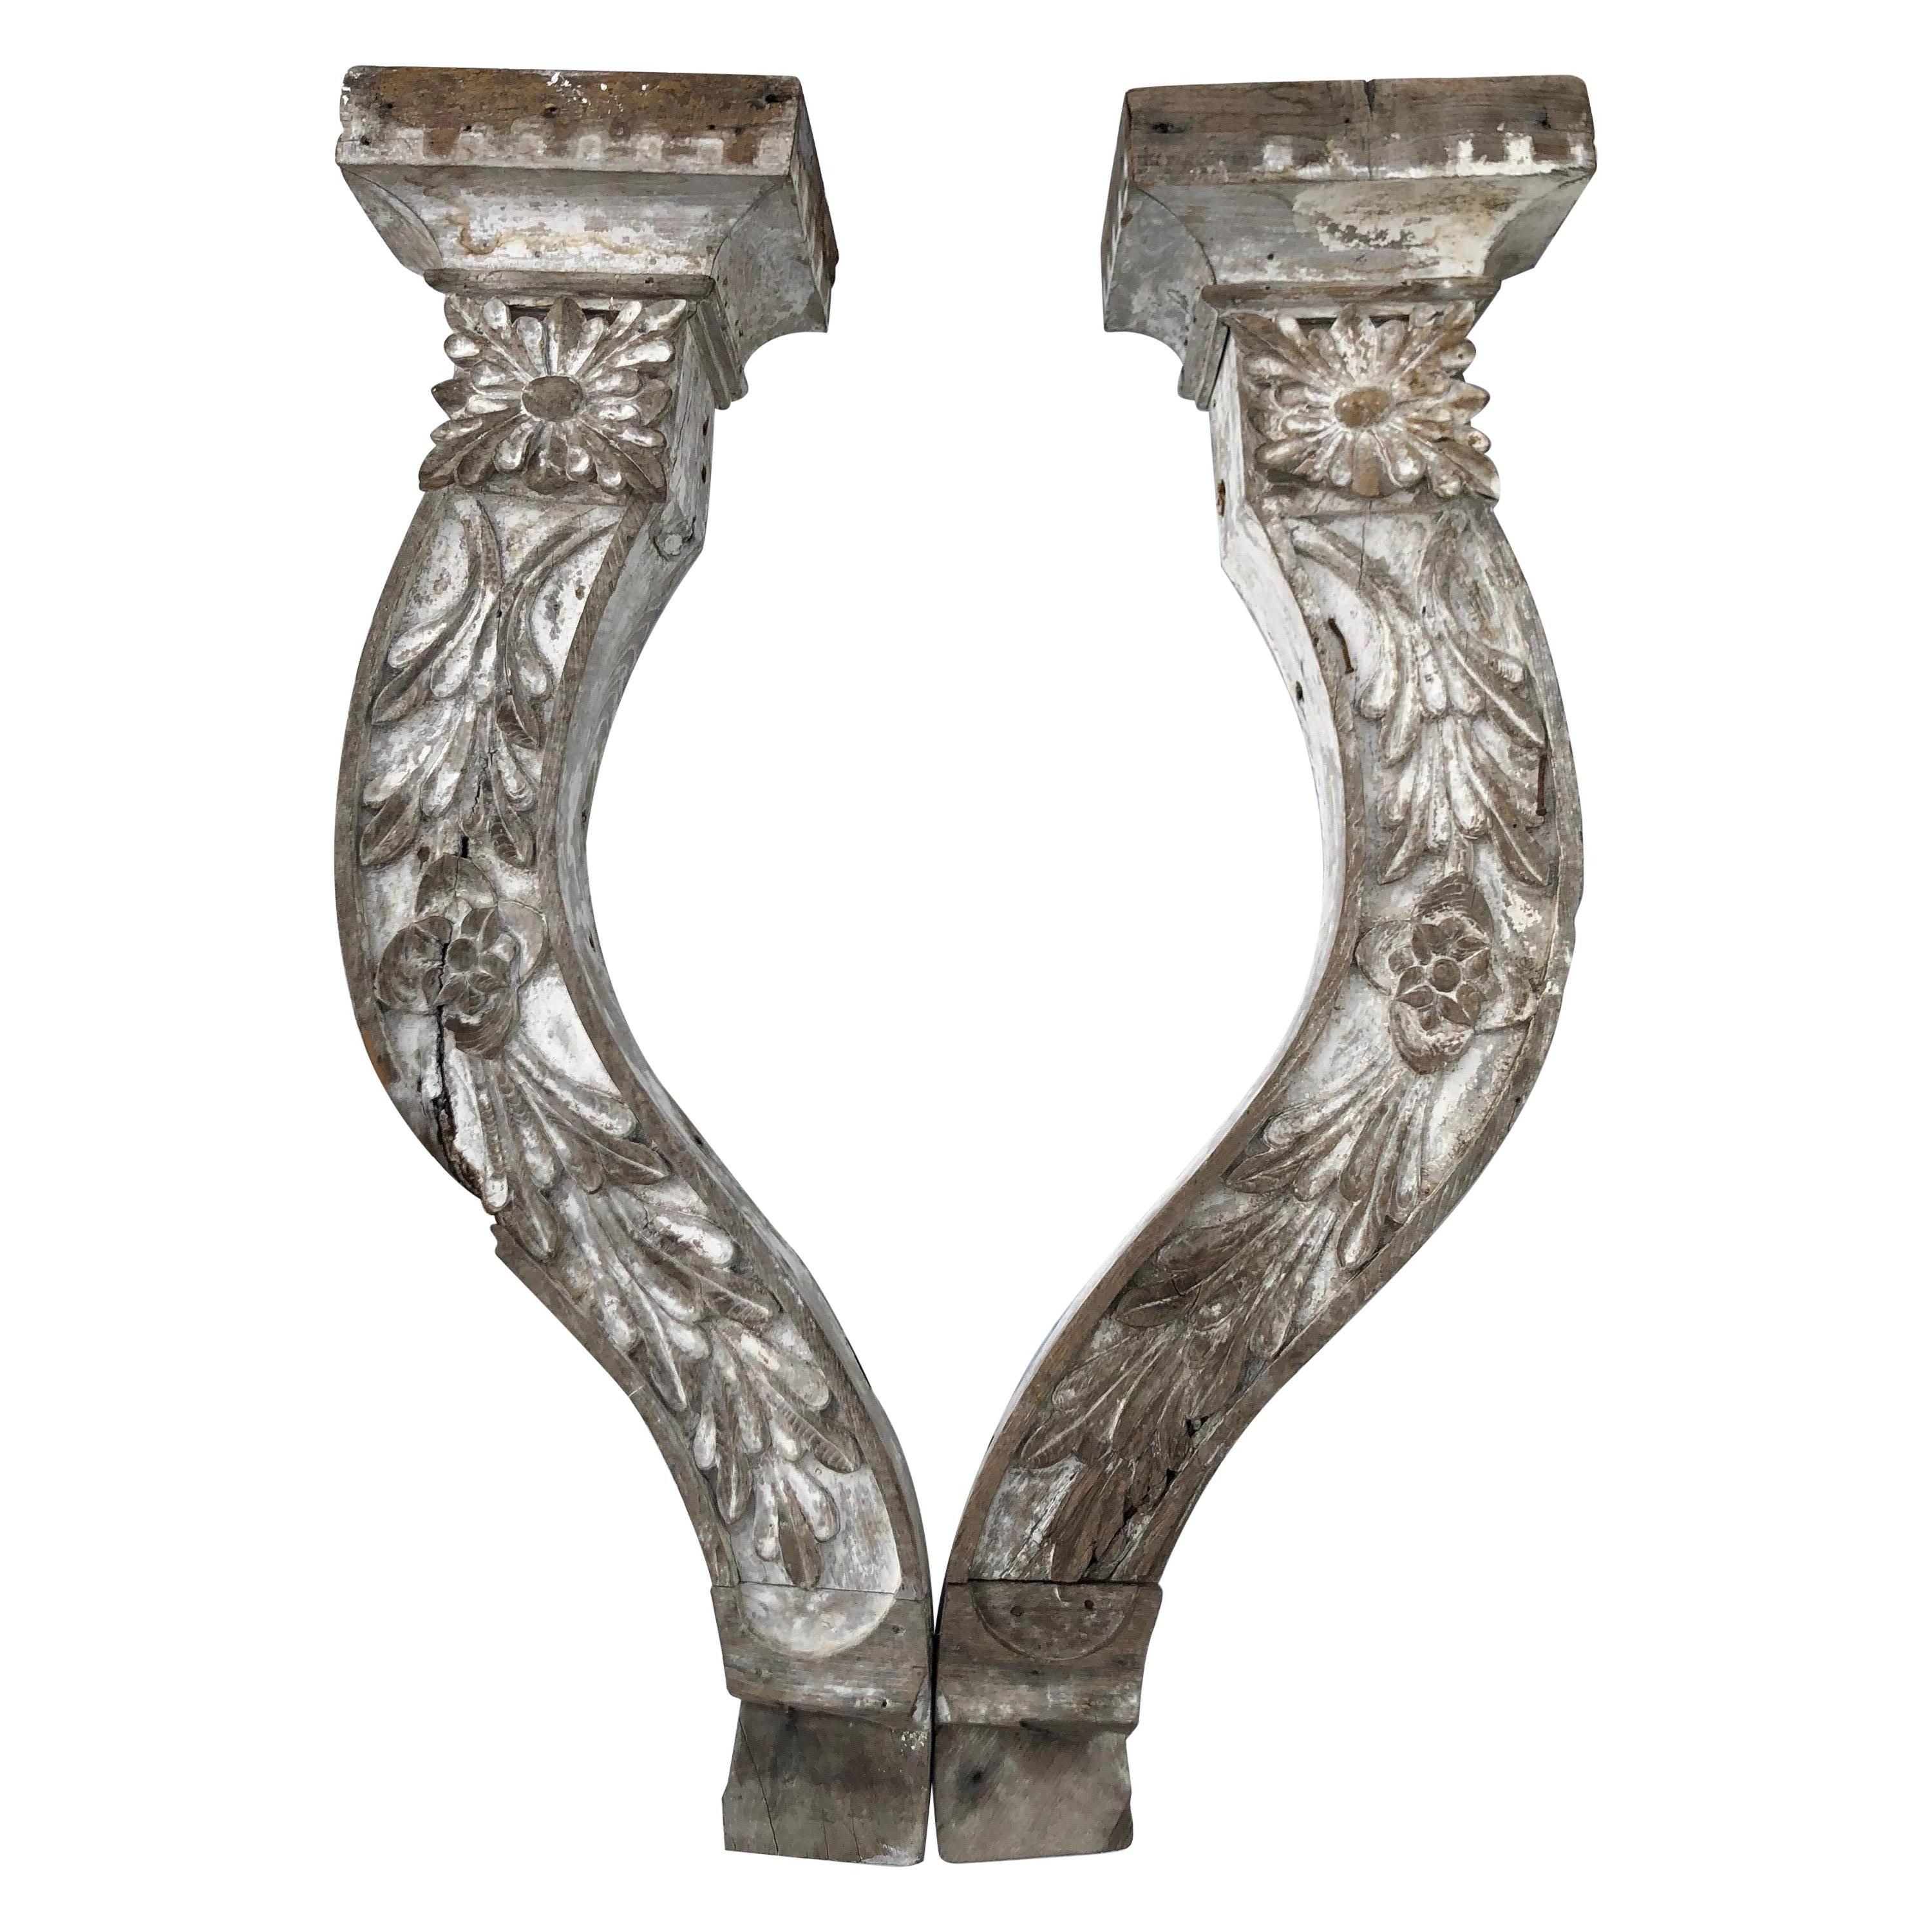 Pair of Large Shabby Chic Farm-House Corbels or Wall Sconces